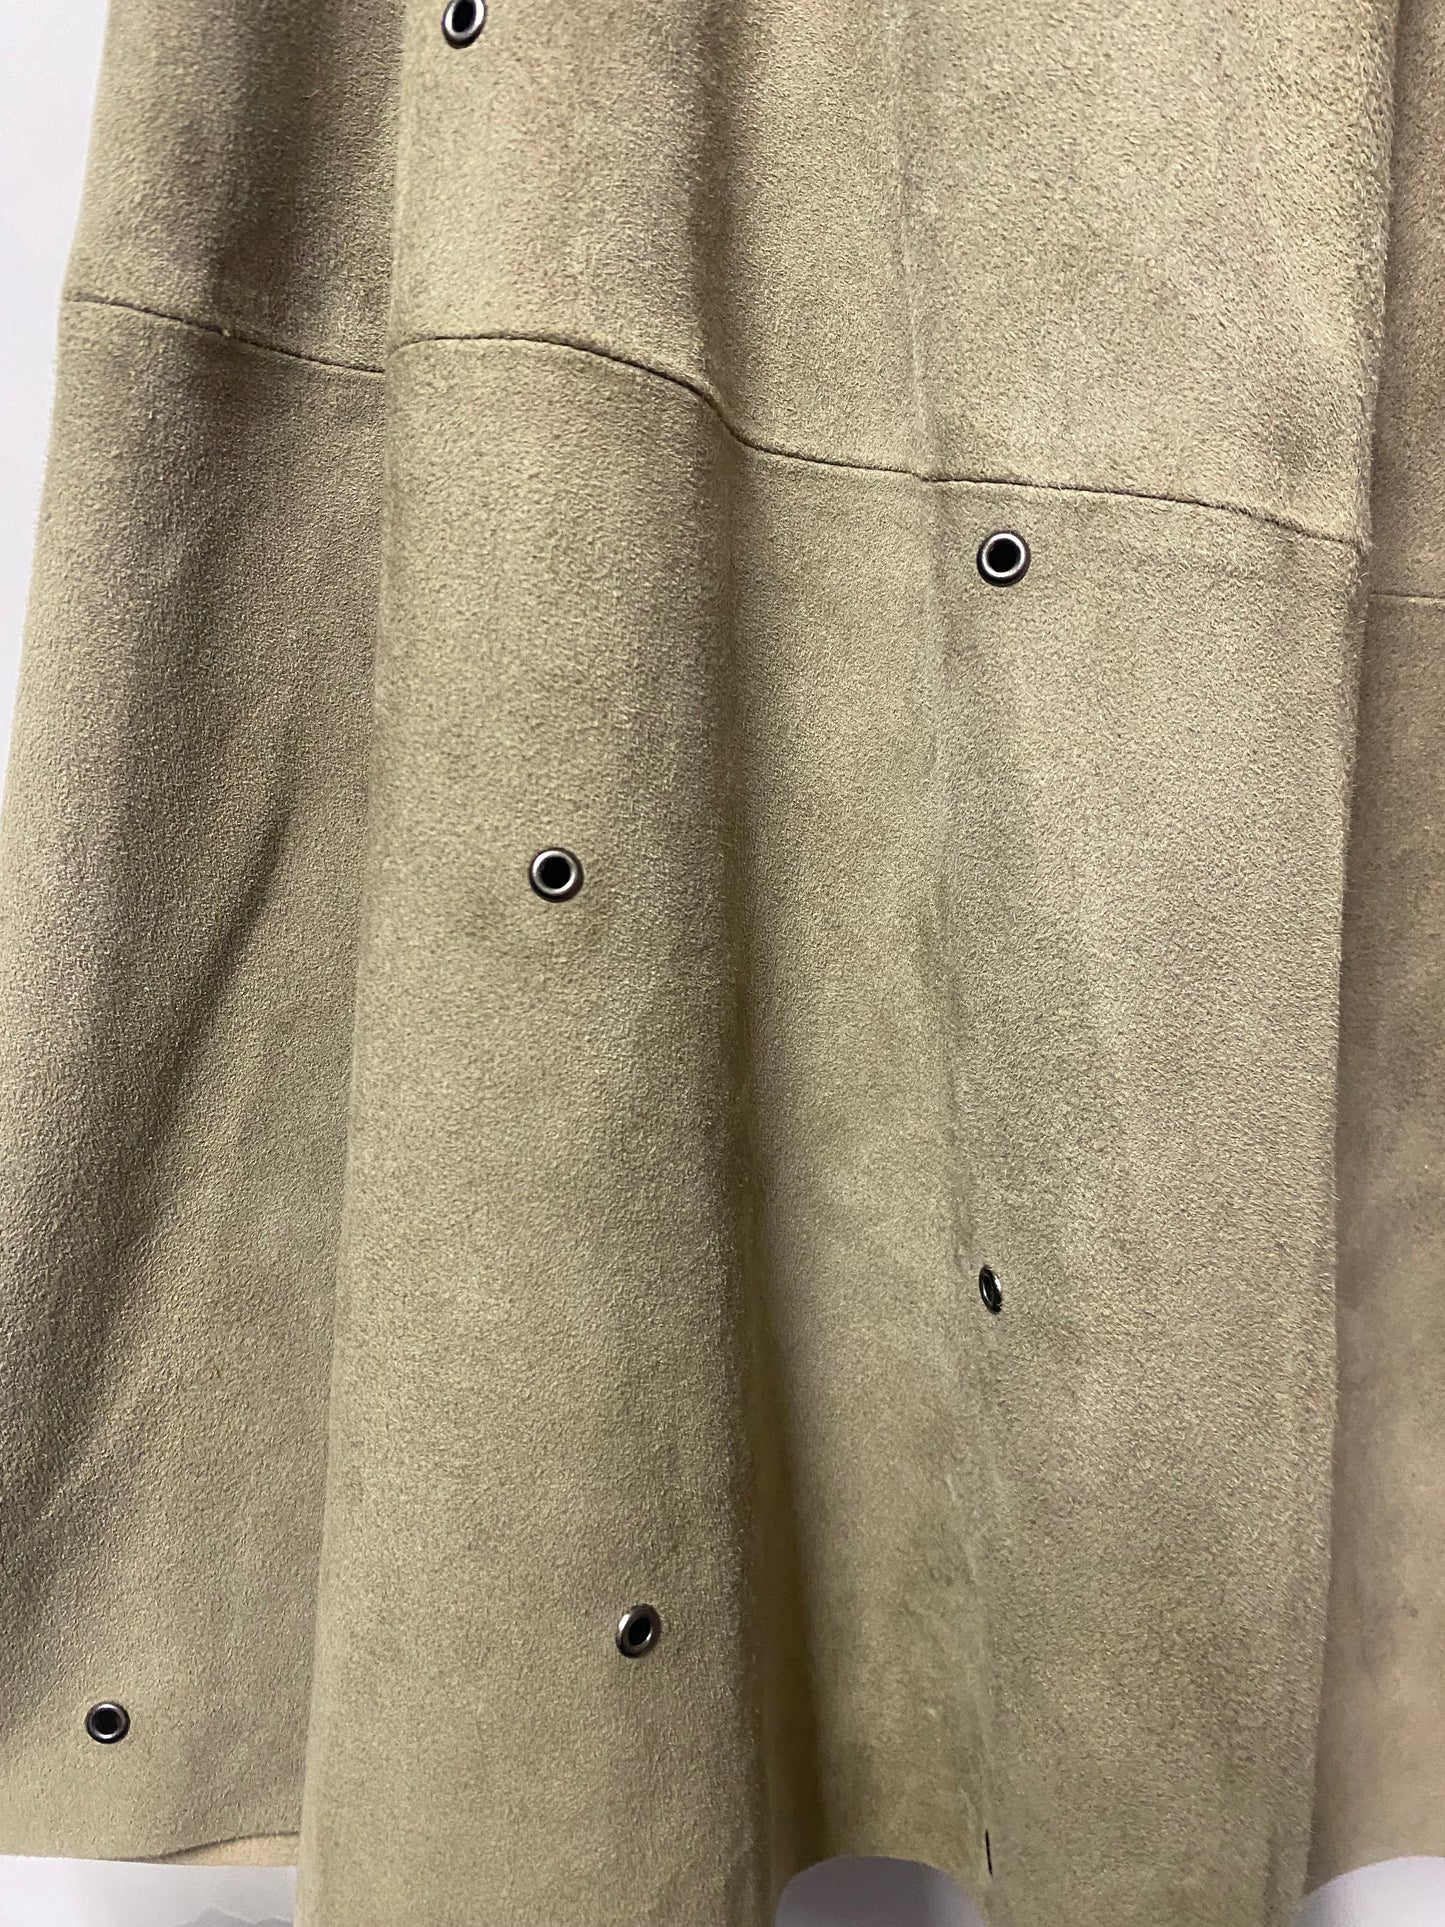 Banana Republic Stone Suede A-line Skirt with Eyelets 6